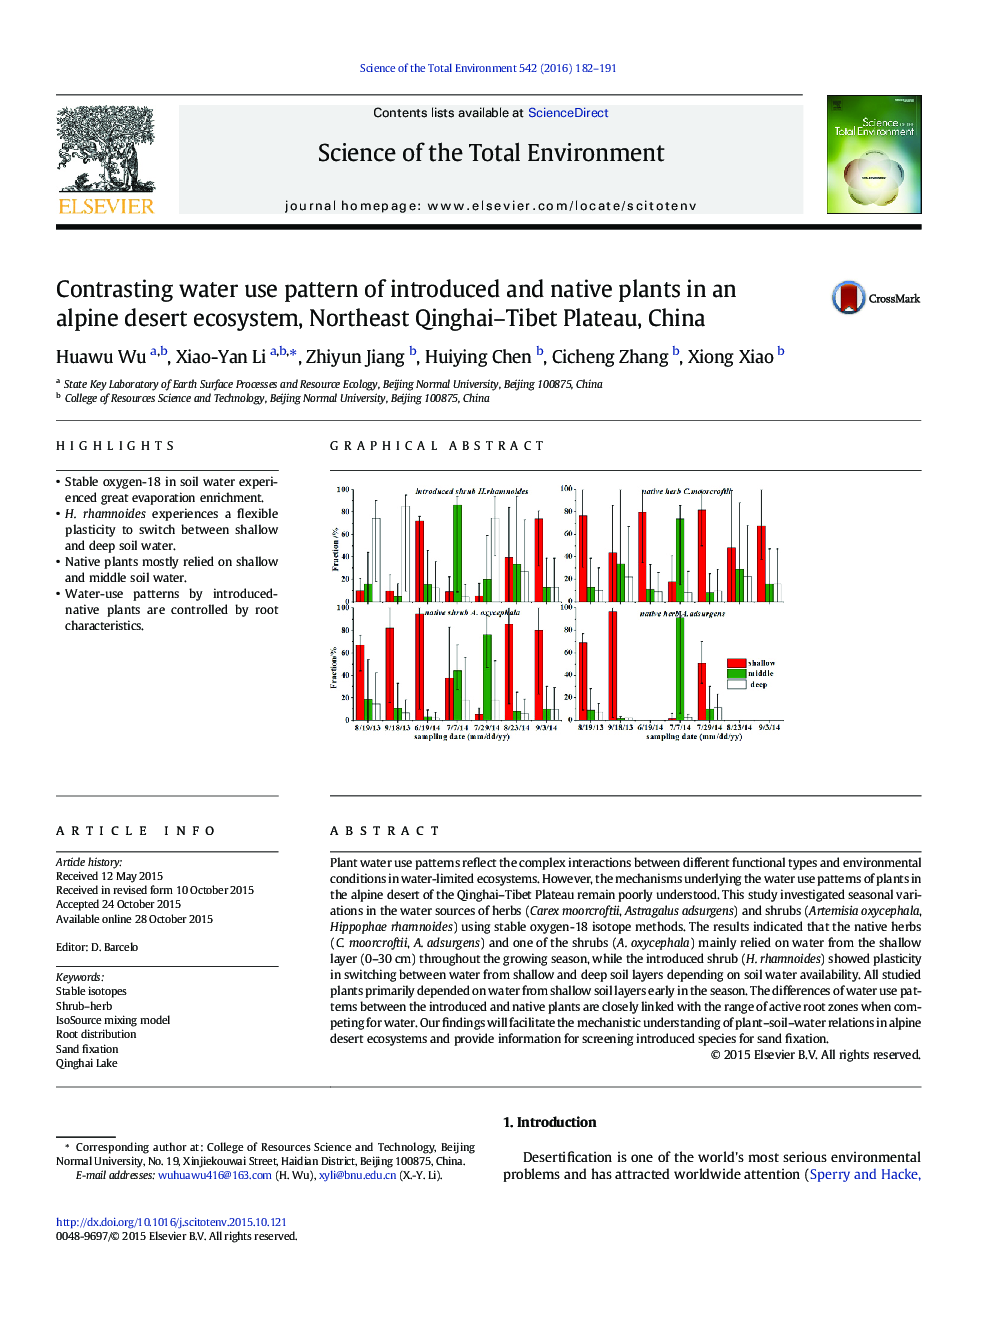 Contrasting water use pattern of introduced and native plants in an alpine desert ecosystem, Northeast Qinghai-Tibet Plateau, China